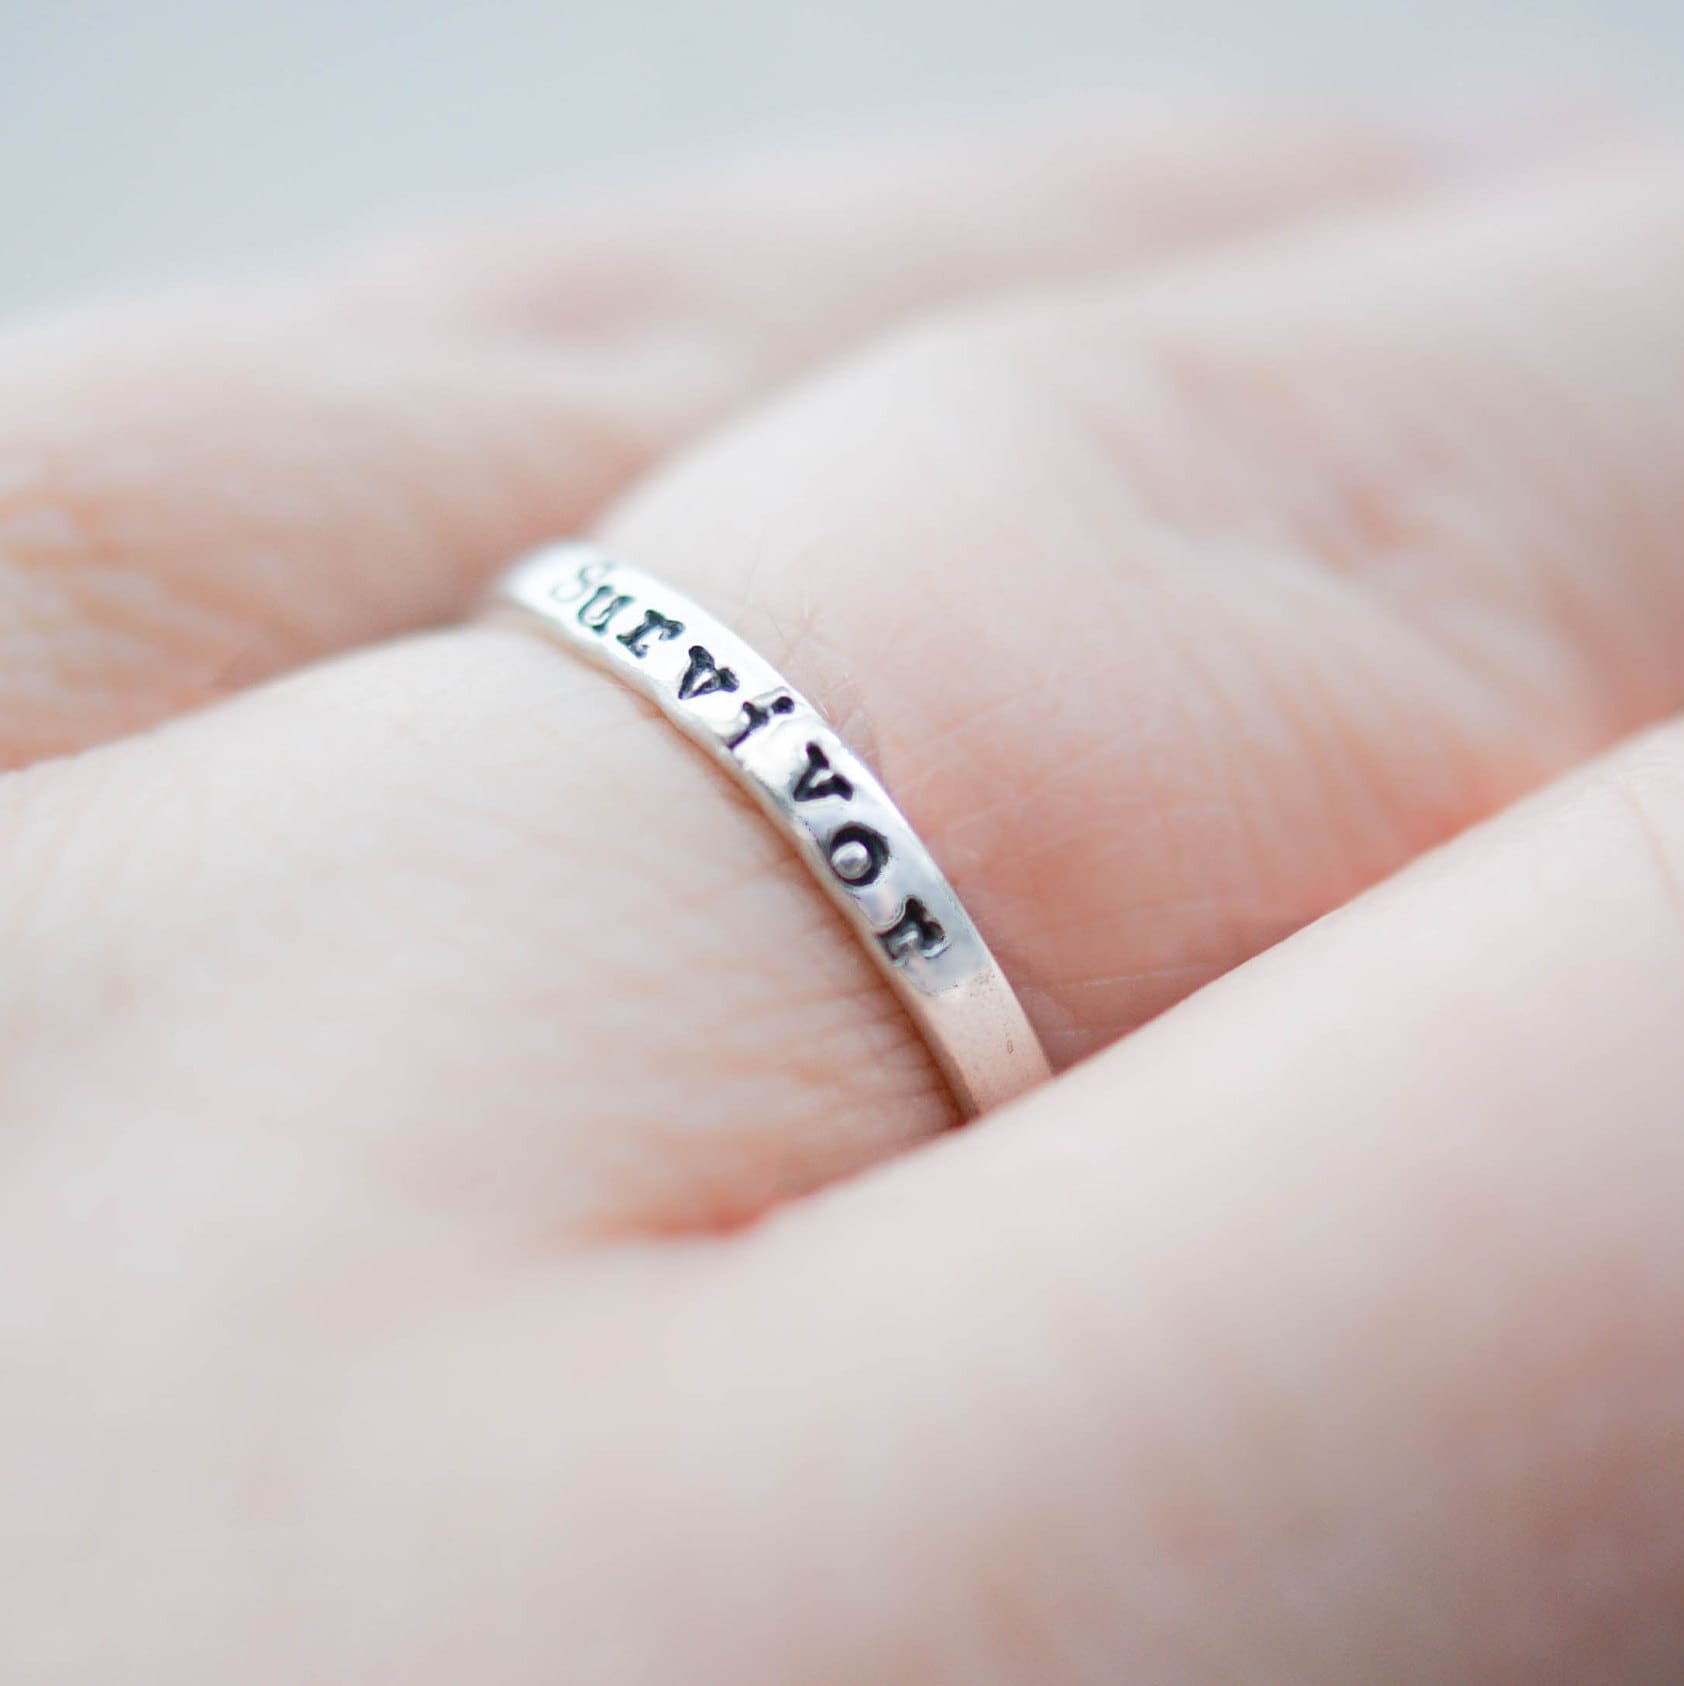 Sterling silver ring stamped with Survivor on hand